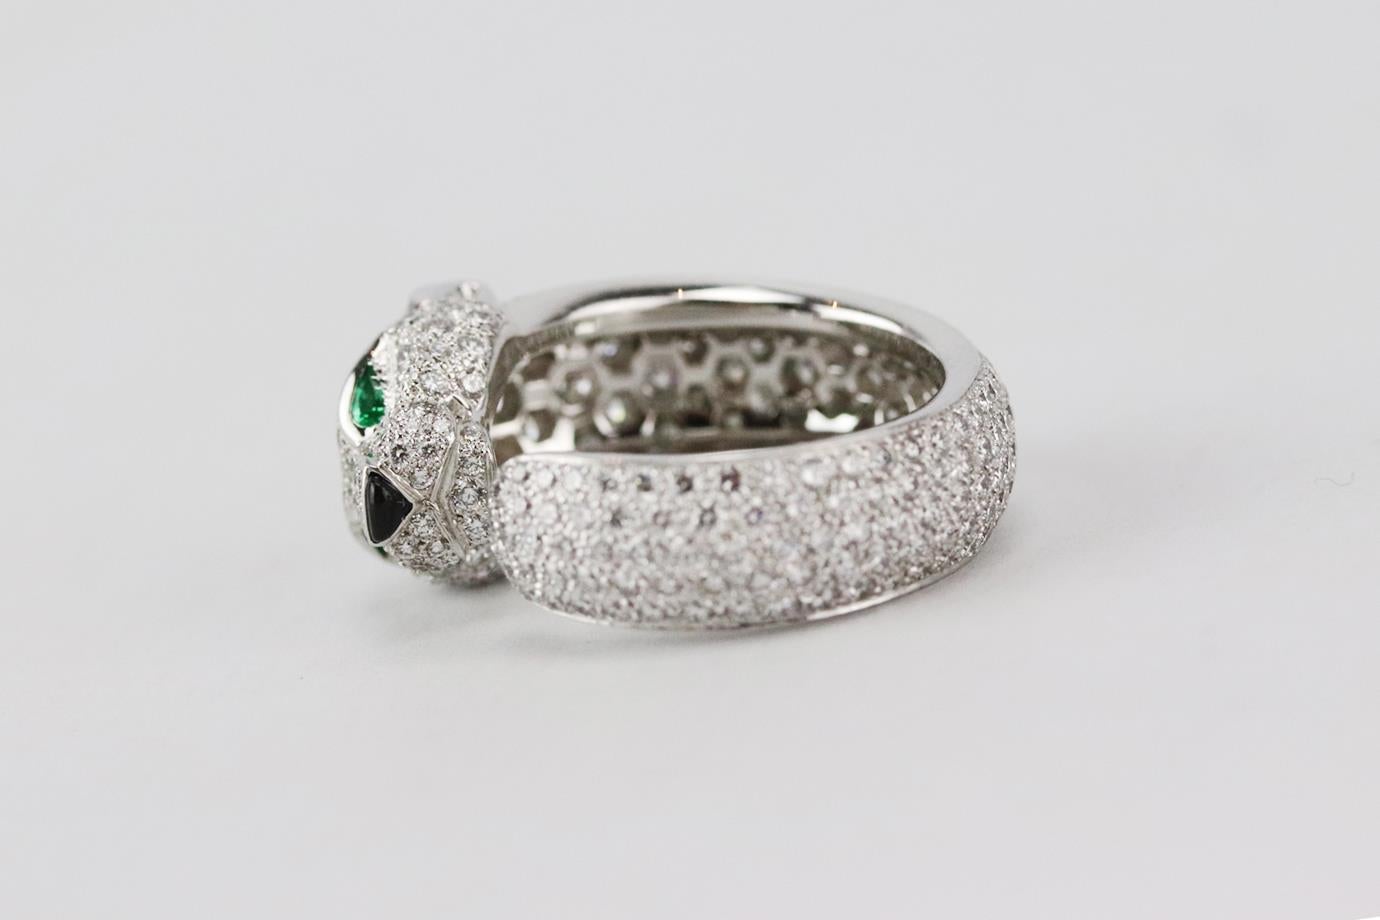 Cartier Panthère de Cartier 18k white gold and diamond ring. Made from white-gold with 285 diamonds totalling 2.39 carats, emeralds eyes and onyx nose. White-gold. Comes with pouch and box. Size: 51 mm. Width: 5 mm
